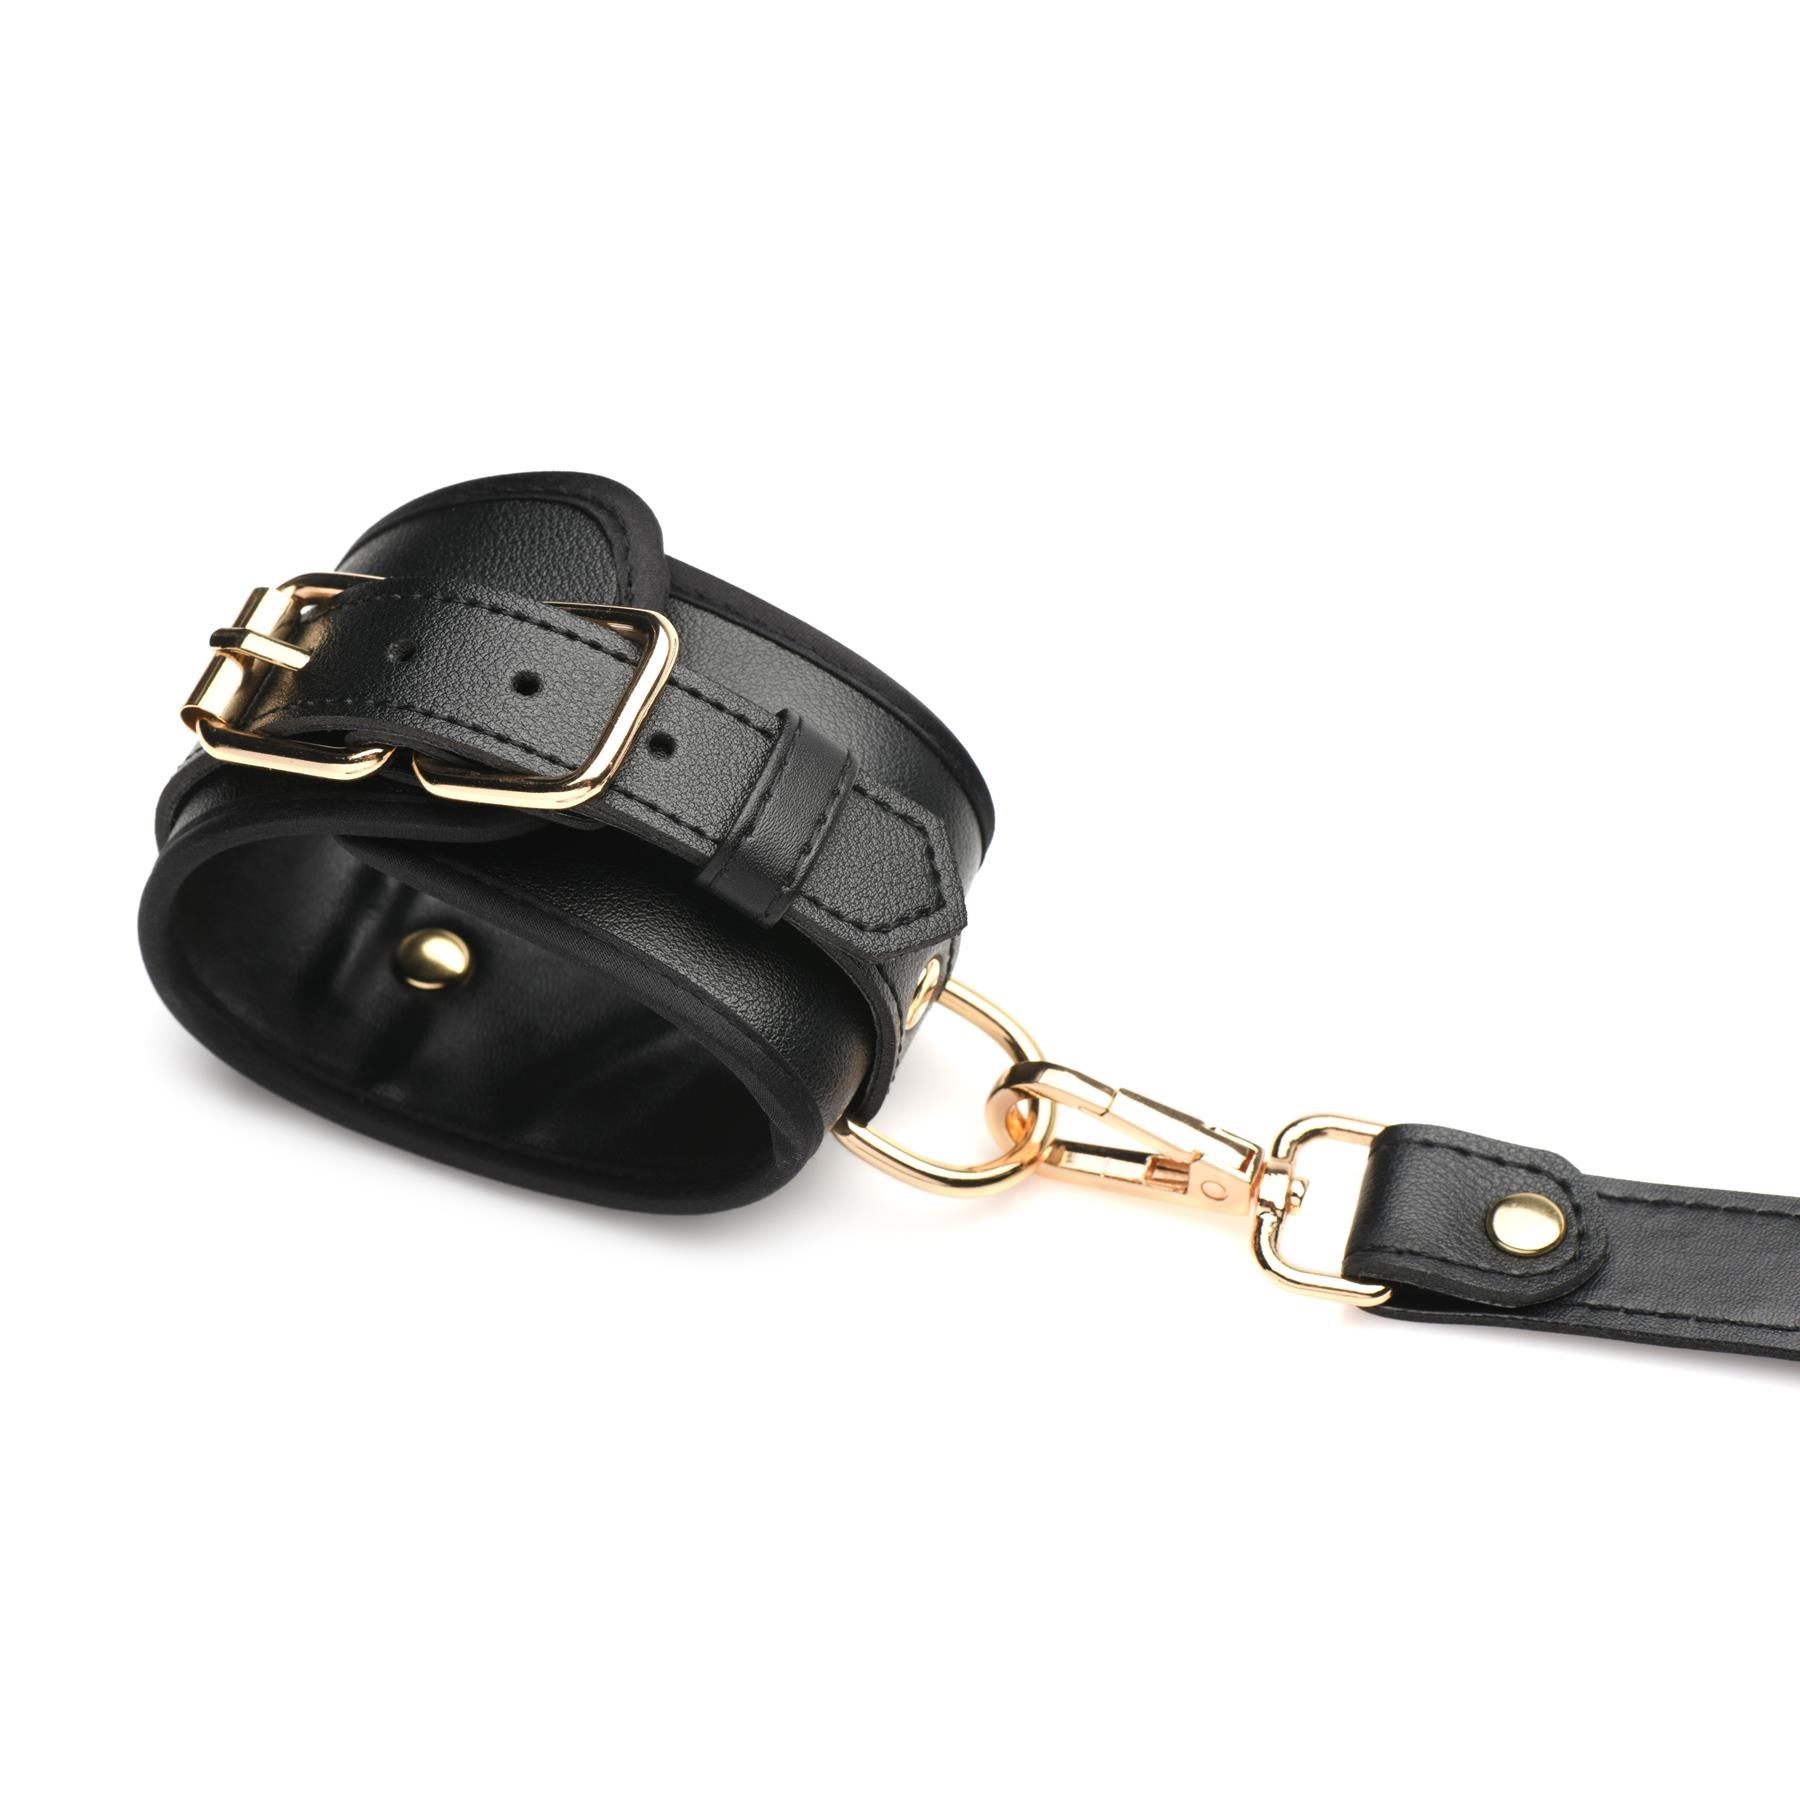 Strict Bondage Harness With Bows - Close Up on Cuffs